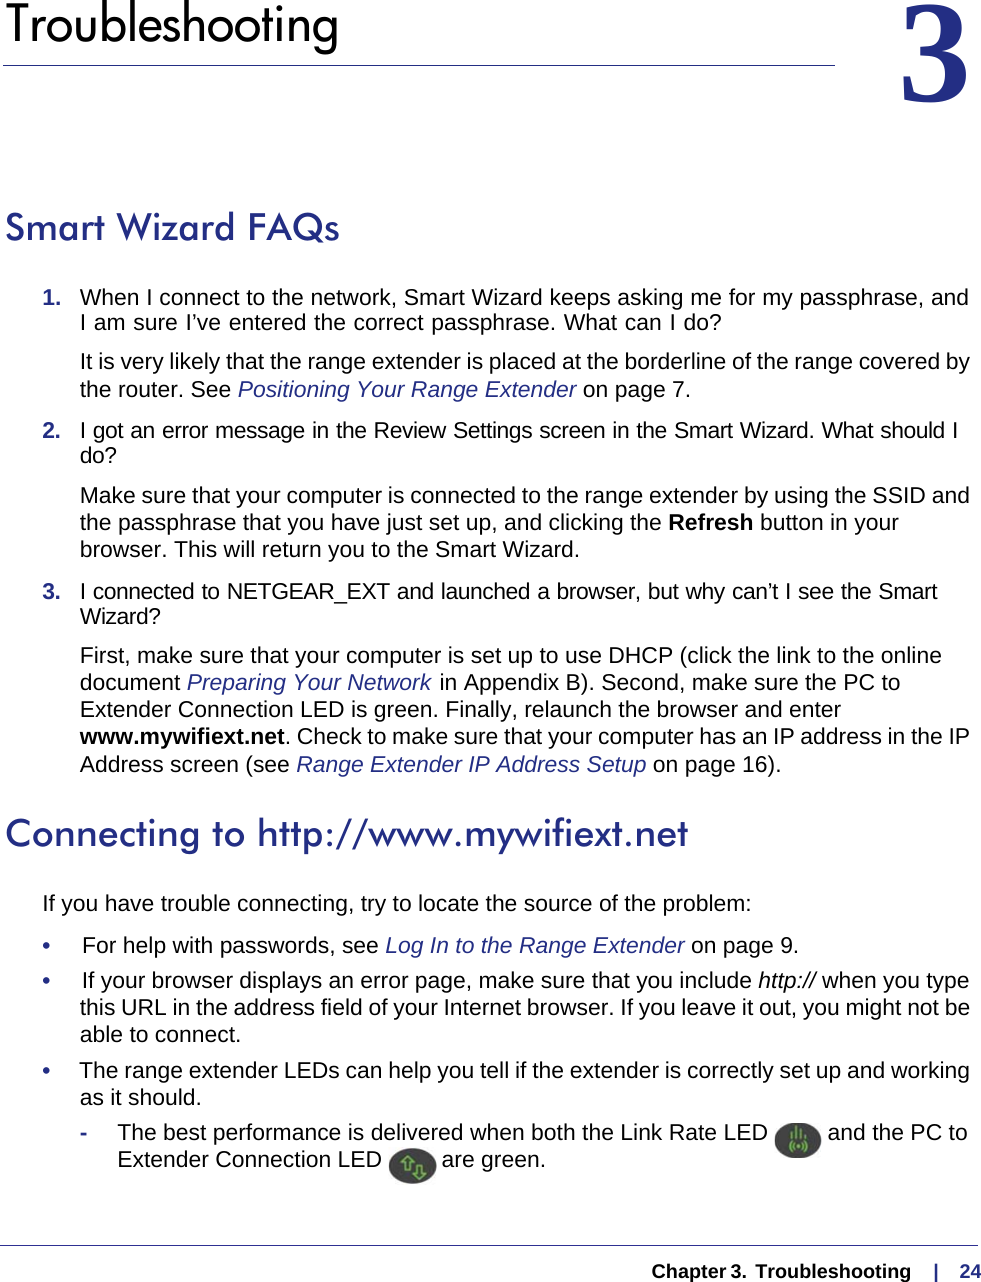   Chapter 3.  Troubleshooting     |    2433.   TroubleshootingSmart Wizard FAQs1.  When I connect to the network, Smart Wizard keeps asking me for my passphrase, and I am sure I’ve entered the correct passphrase. What can I do?It is very likely that the range extender is placed at the borderline of the range covered by the router. See Positioning Your Range Extender on page  7.2.  I got an error message in the Review Settings screen in the Smart Wizard. What should I do?Make sure that your computer is connected to the range extender by using the SSID and the passphrase that you have just set up, and clicking the Refresh button in your browser. This will return you to the Smart Wizard.3.  I connected to NETGEAR_EXT and launched a browser, but why can’t I see the Smart Wizard?First, make sure that your computer is set up to use DHCP (click the link to the online document Preparing Your Network  in Appendix  B). Second, make sure the PC to Extender Connection LED is green. Finally, relaunch the browser and enter www.mywifiext.net. Check to make sure that your computer has an IP address in the IP Address screen (see Range Extender IP Address Setup on page  16).Connecting to http://www.mywifiext.netIf you have trouble connecting, try to locate the source of the problem:•     For help with passwords, see Log In to the Range Extender on page  9.•     If your browser displays an error page, make sure that you include http:// when you type this URL in the address field of your Internet browser. If you leave it out, you might not be able to connect.•     The range extender LEDs can help you tell if the extender is correctly set up and working as it should.-The best performance is delivered when both the Link Rate LED   and the PC to Extender Connection LED   are green.